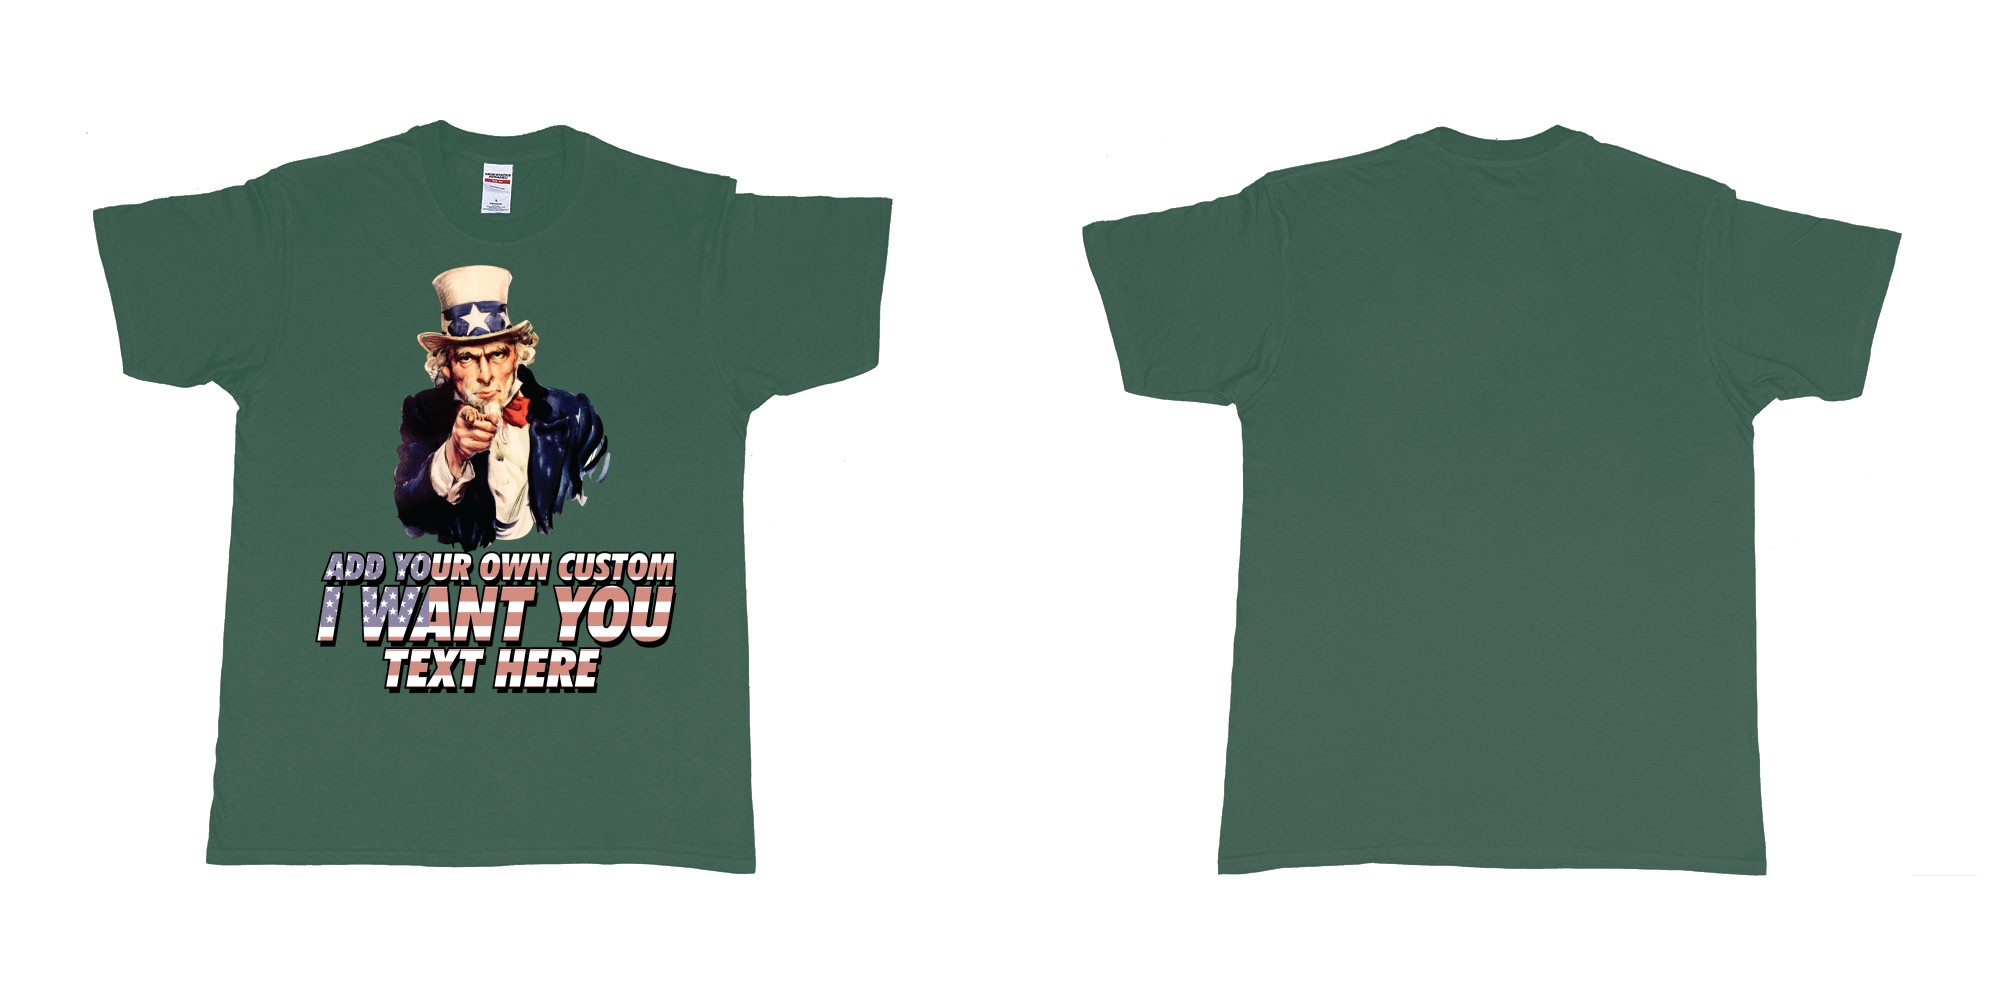 Custom tshirt design uncle sam i want you custom design own printing in fabric color forest-green choice your own text made in Bali by The Pirate Way